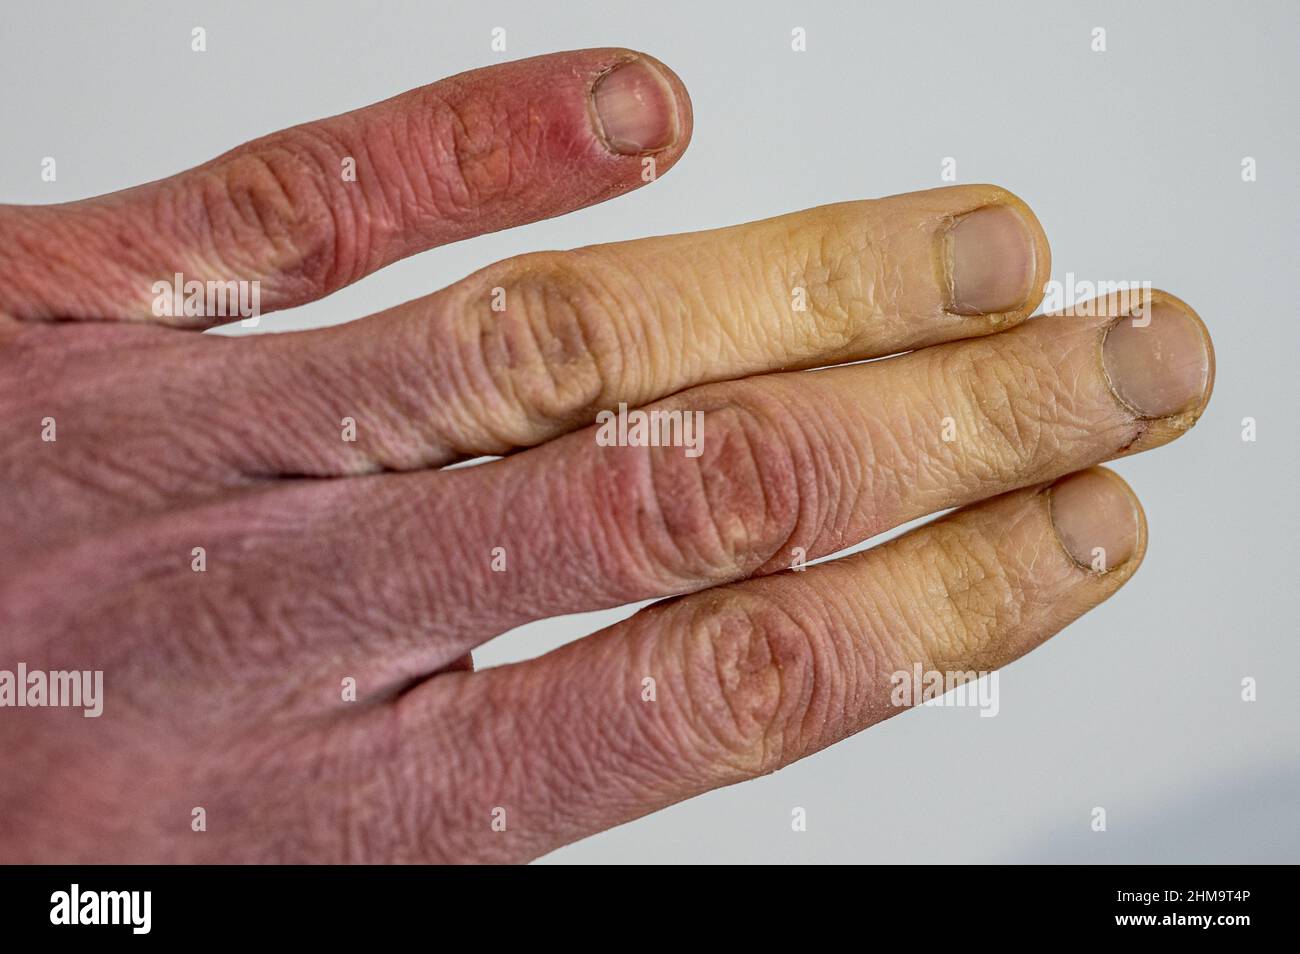 A frostbitten male hand with Raynaud's syndrome, Raynaud's phenomenon or Raynaud's disease. Stock Photo